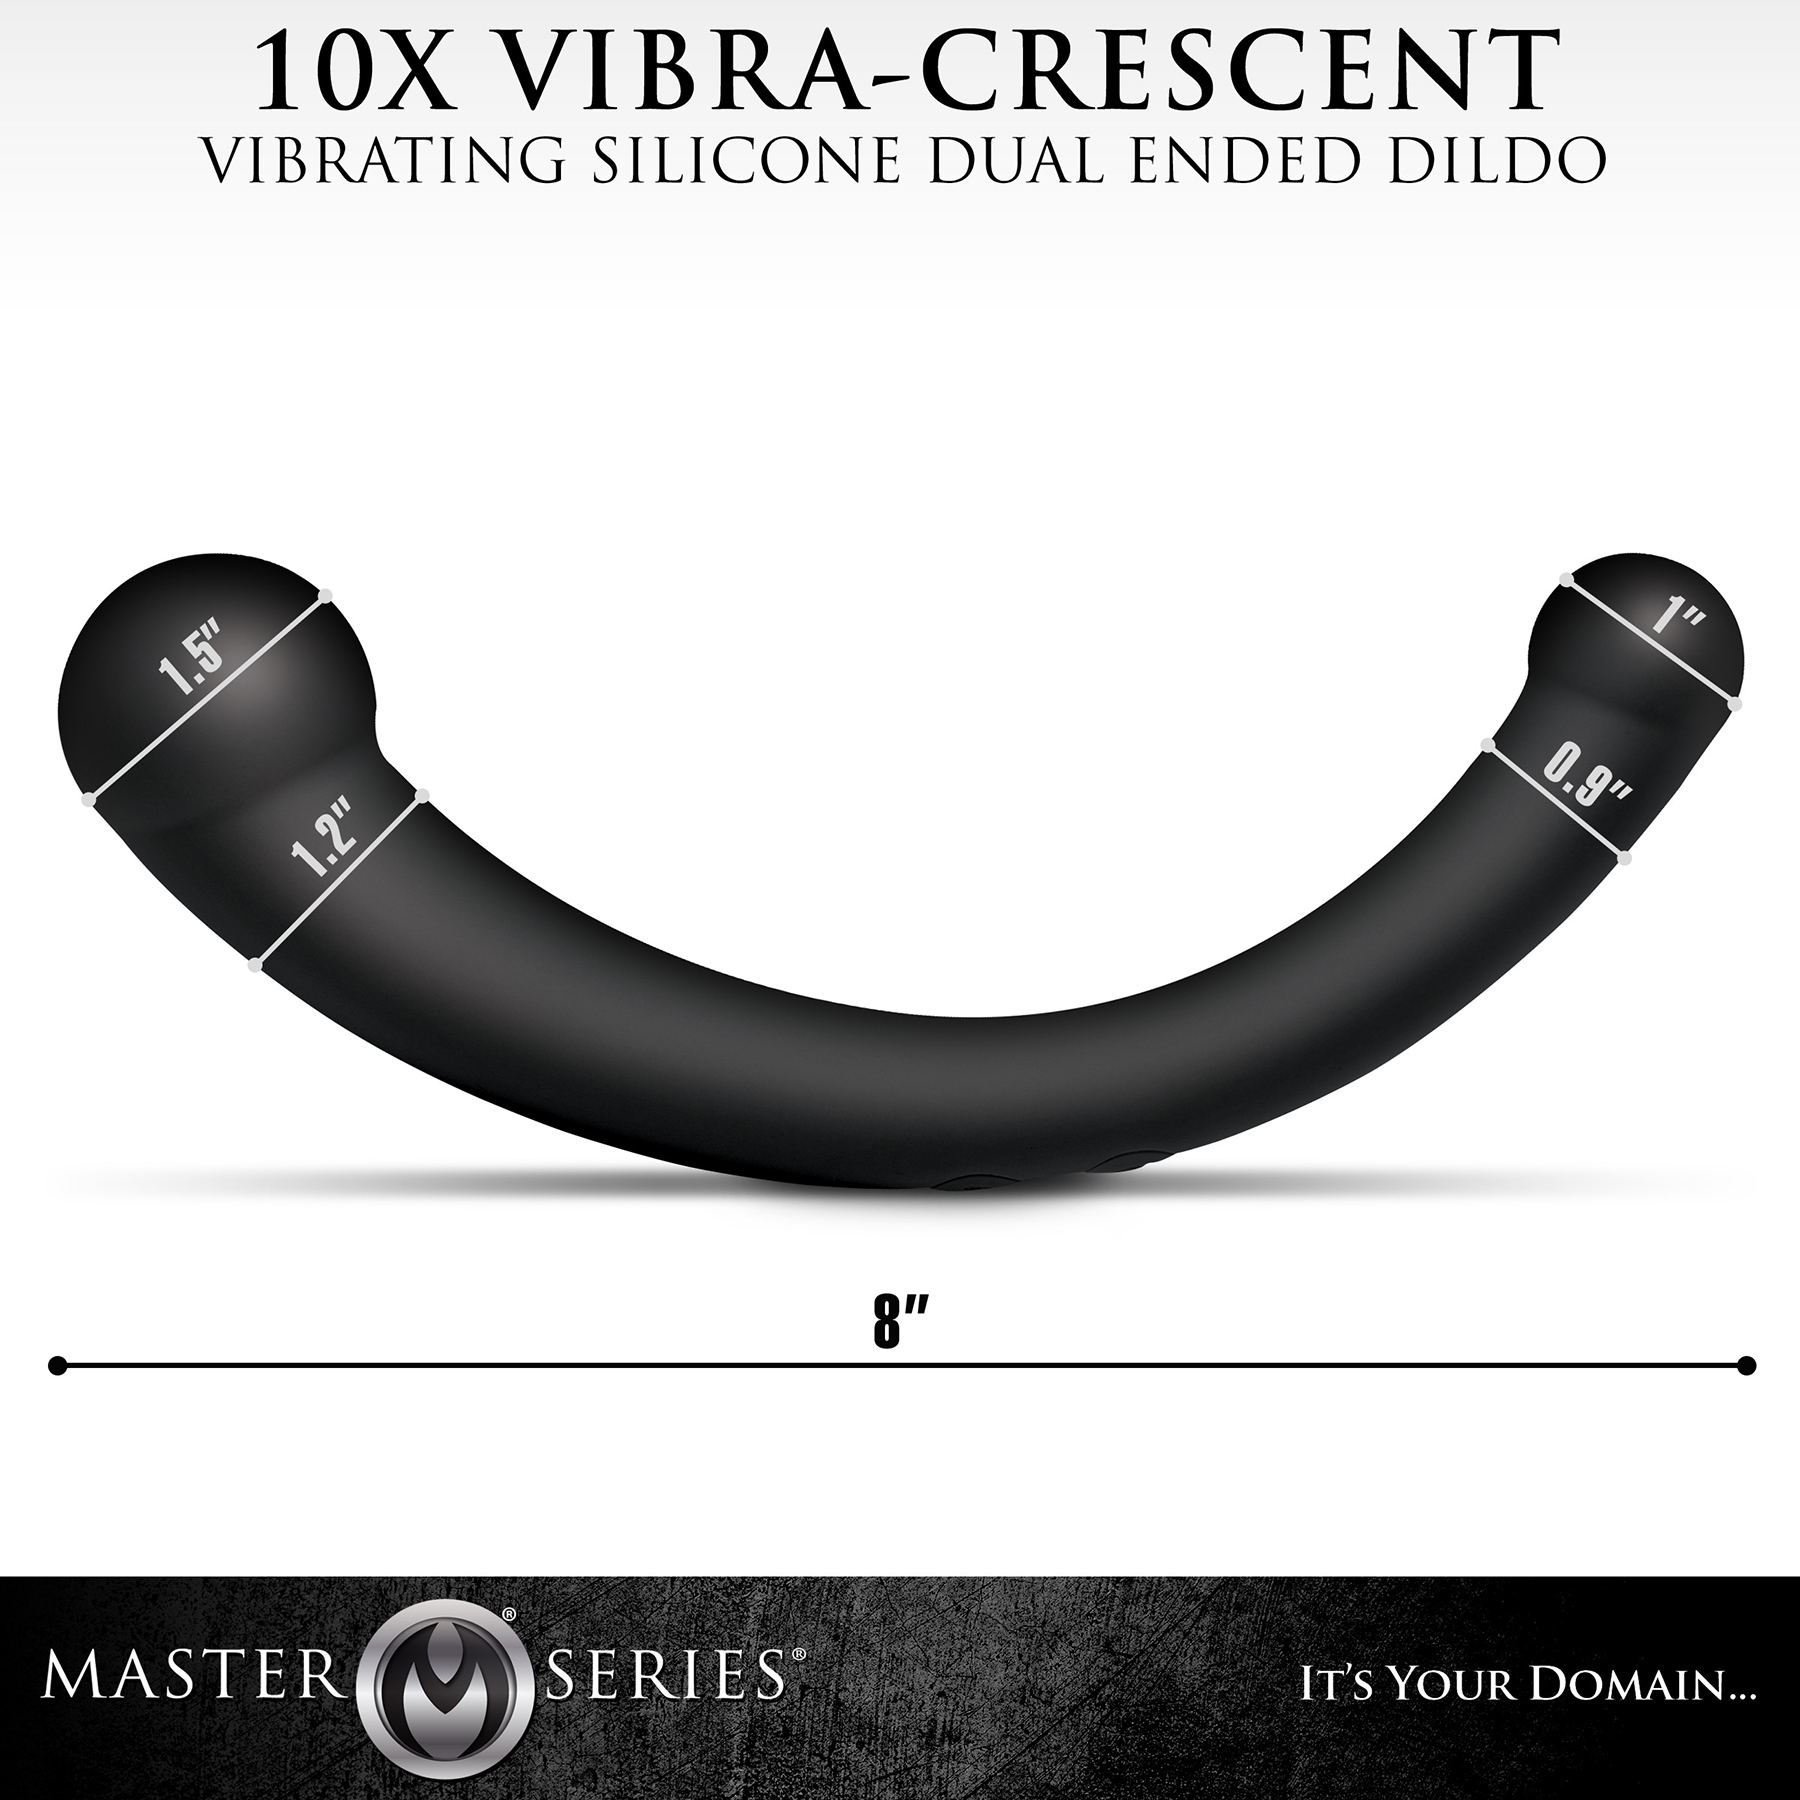 Master Series Vibra-Crescent Rechargeable Silicone Vibrating Dual Ended Dildo - Measurements